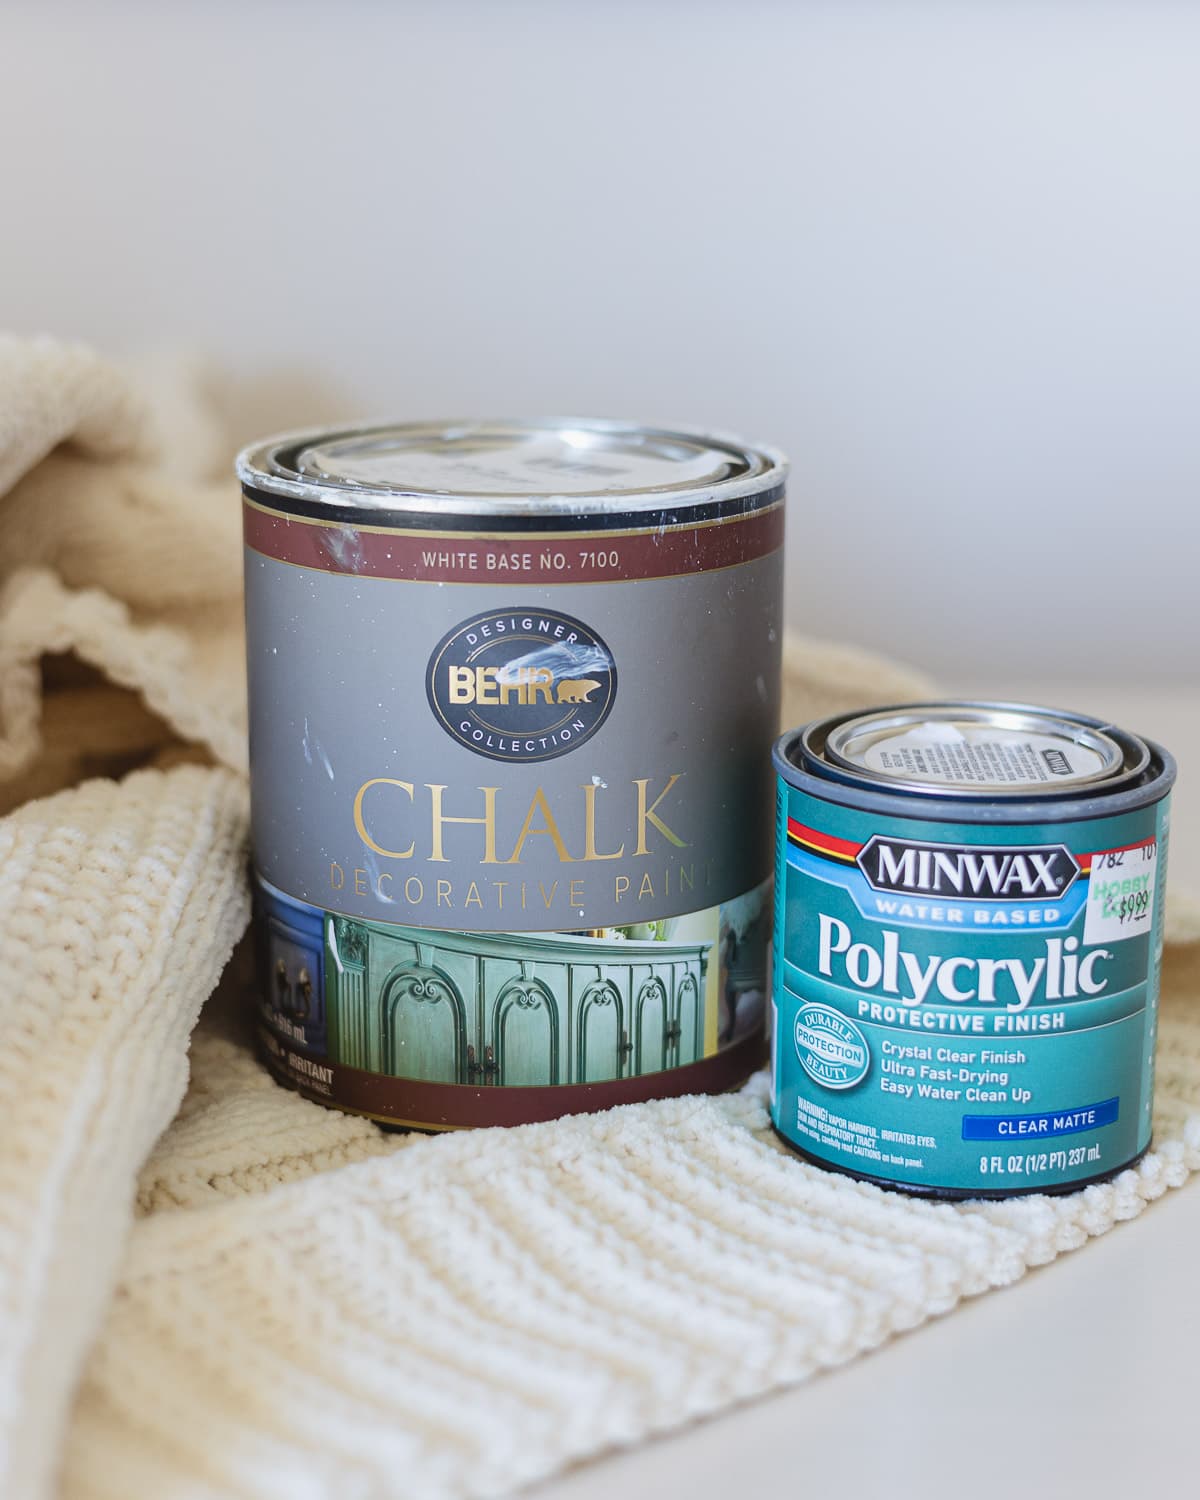 A quart of Behr Chalk Decorative Paint and a 1/2 pint of Minwax Water-based Polycrylic top coat.